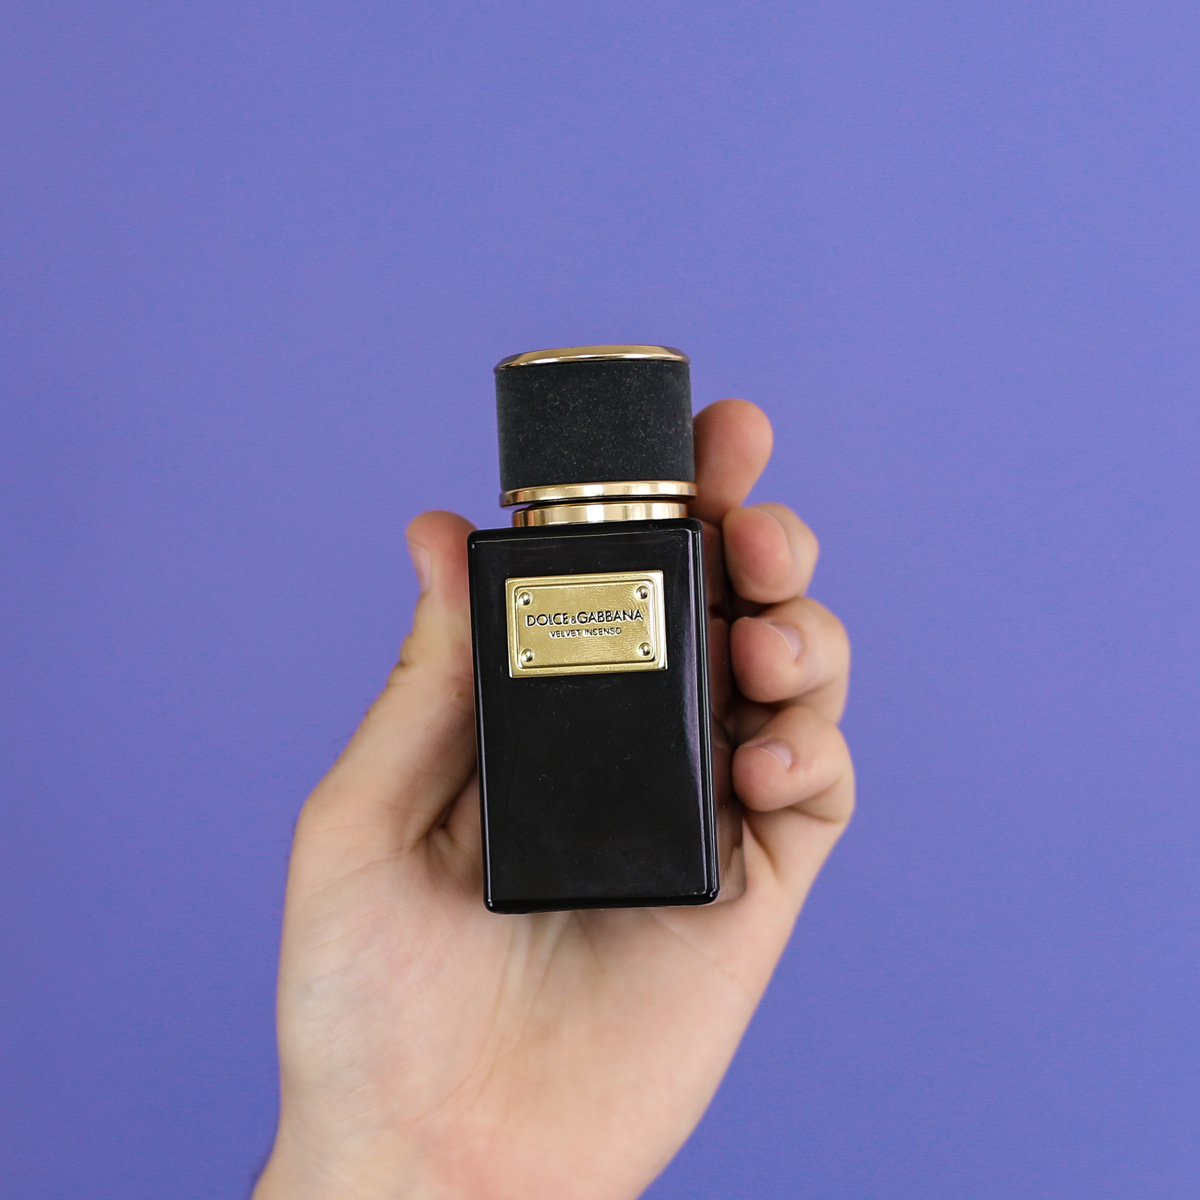 Another great Fragrance layering combination is @louisvuitton